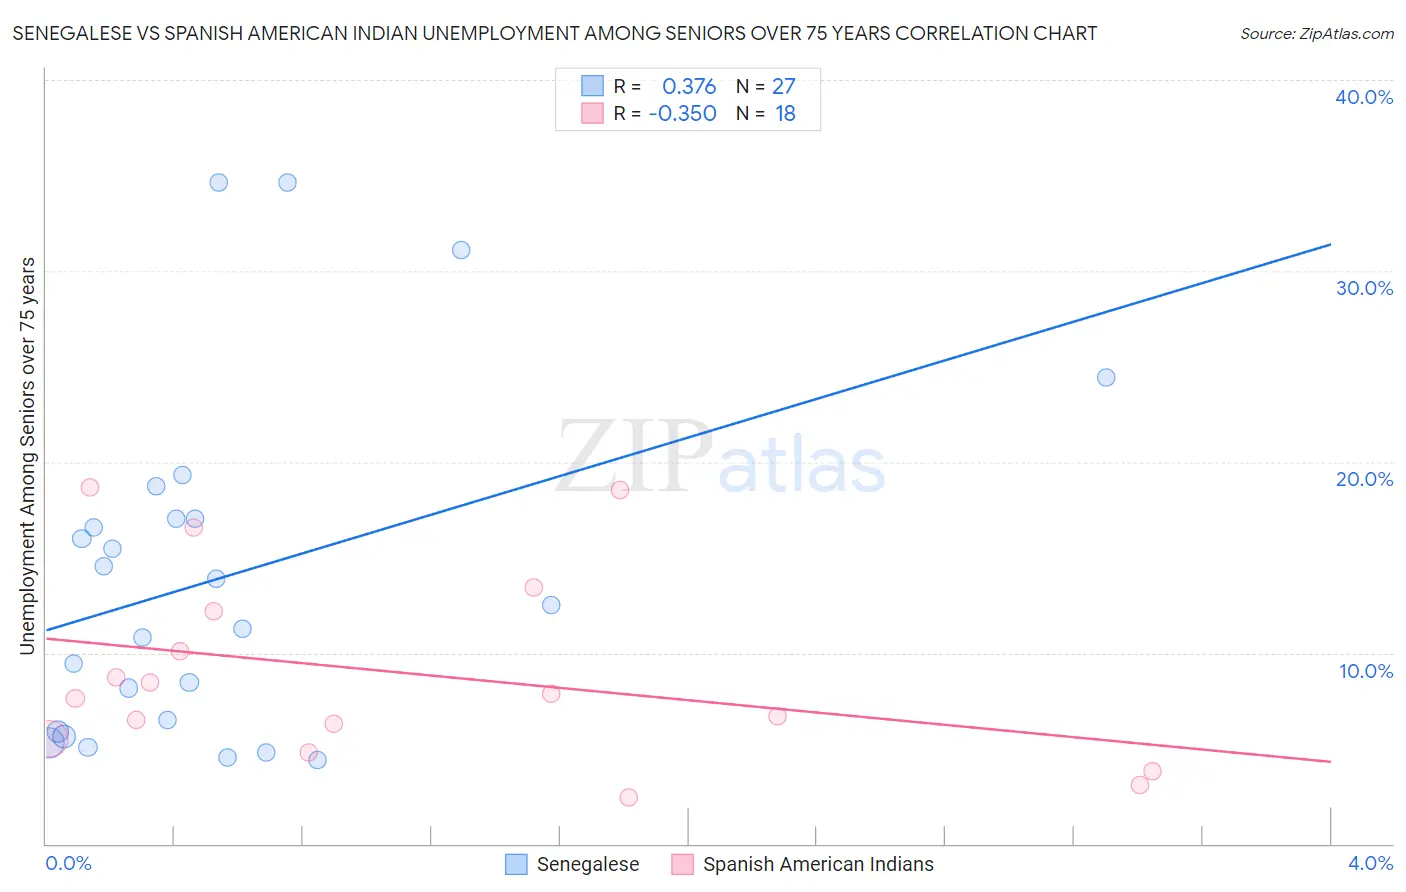 Senegalese vs Spanish American Indian Unemployment Among Seniors over 75 years